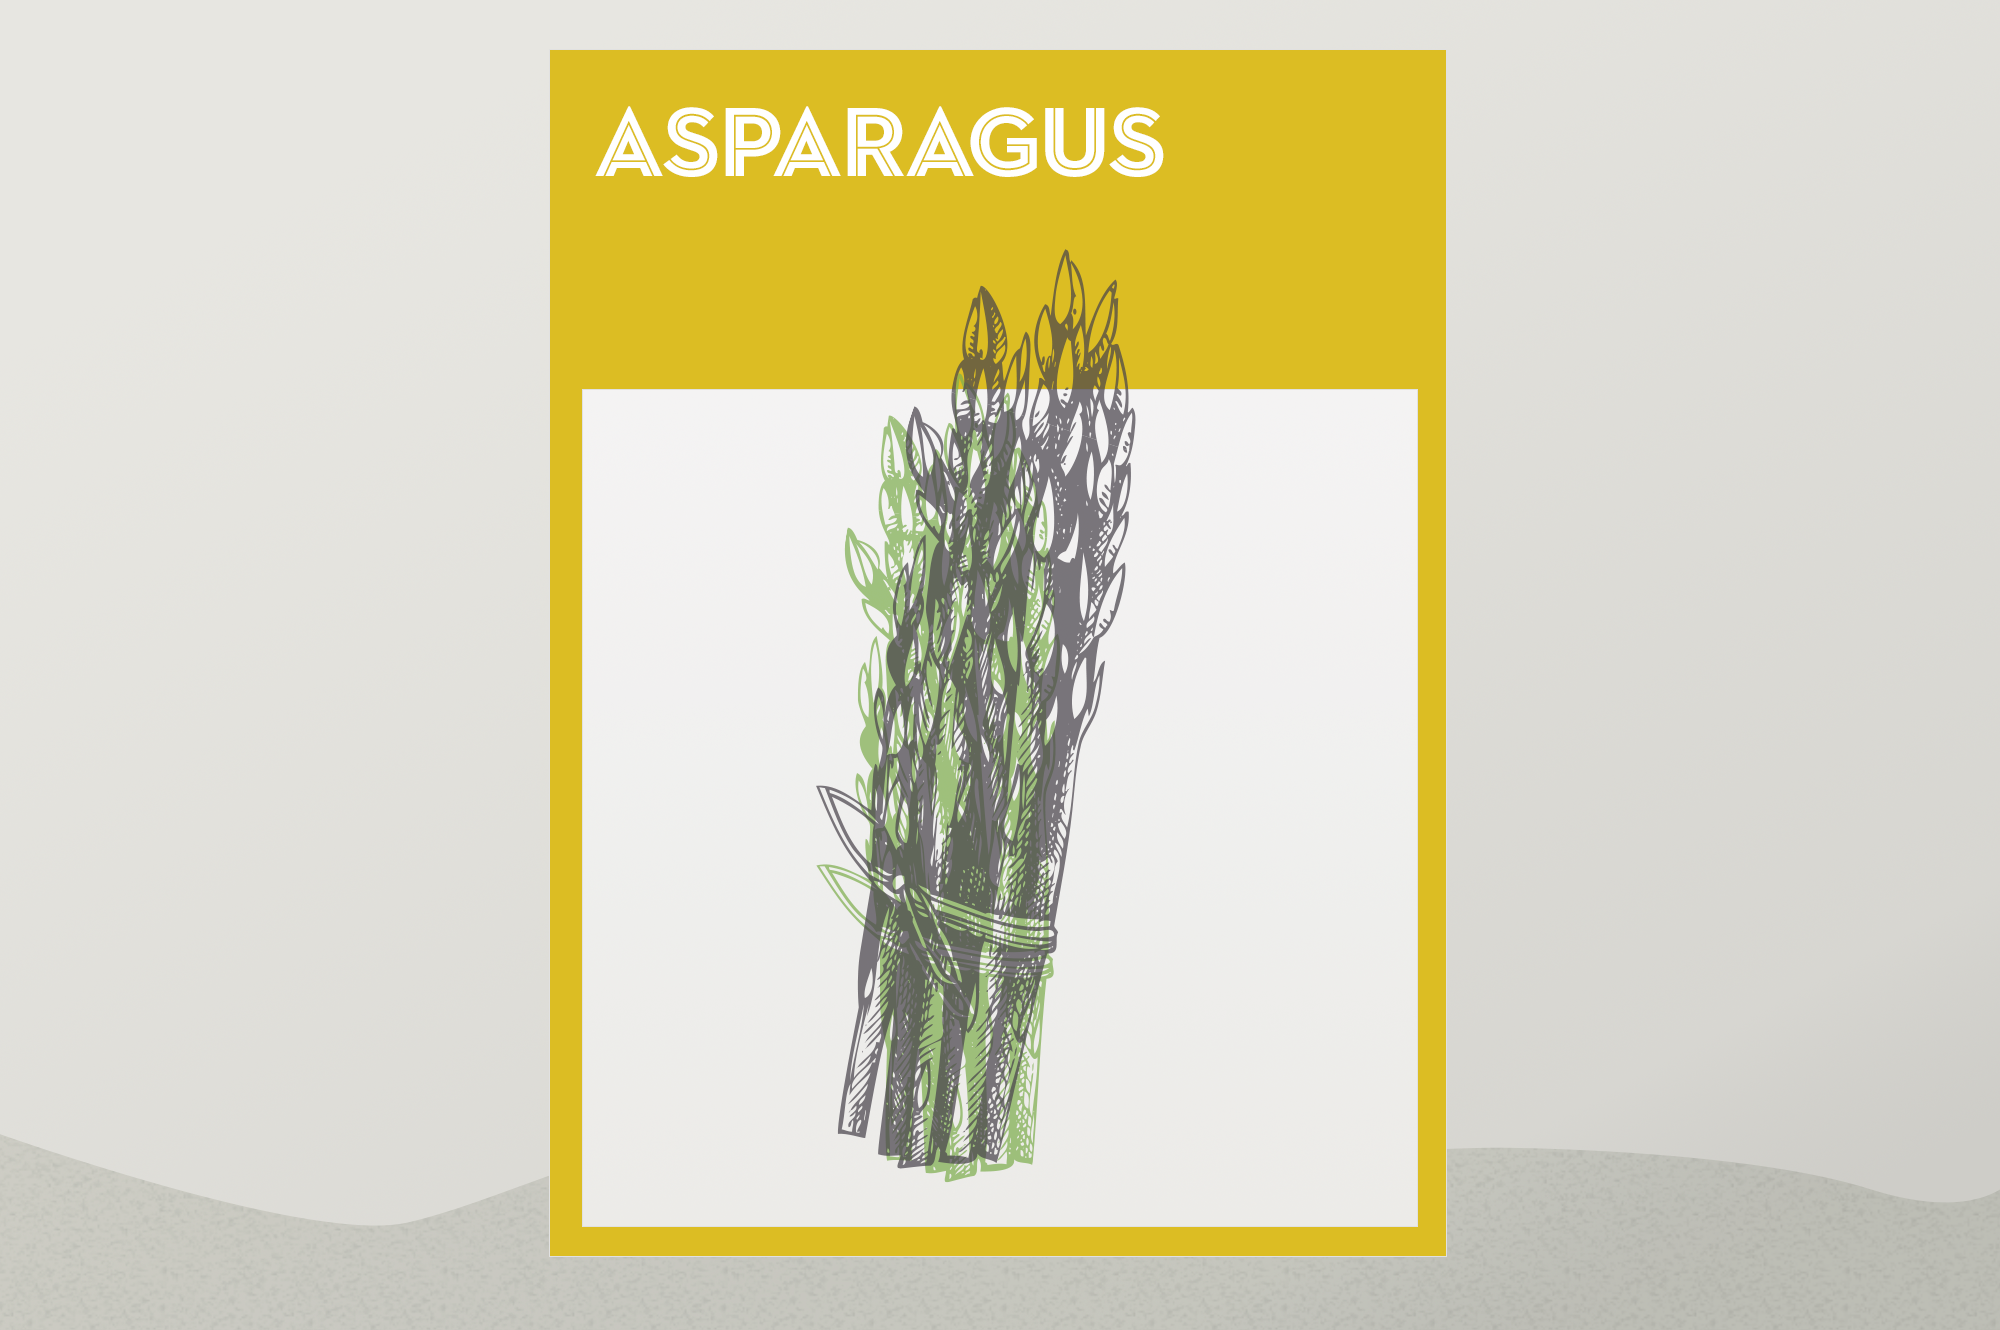 How To Grow Asparagus Tips For Planting Asparagus,Classic Chicken Parmesan Recipe